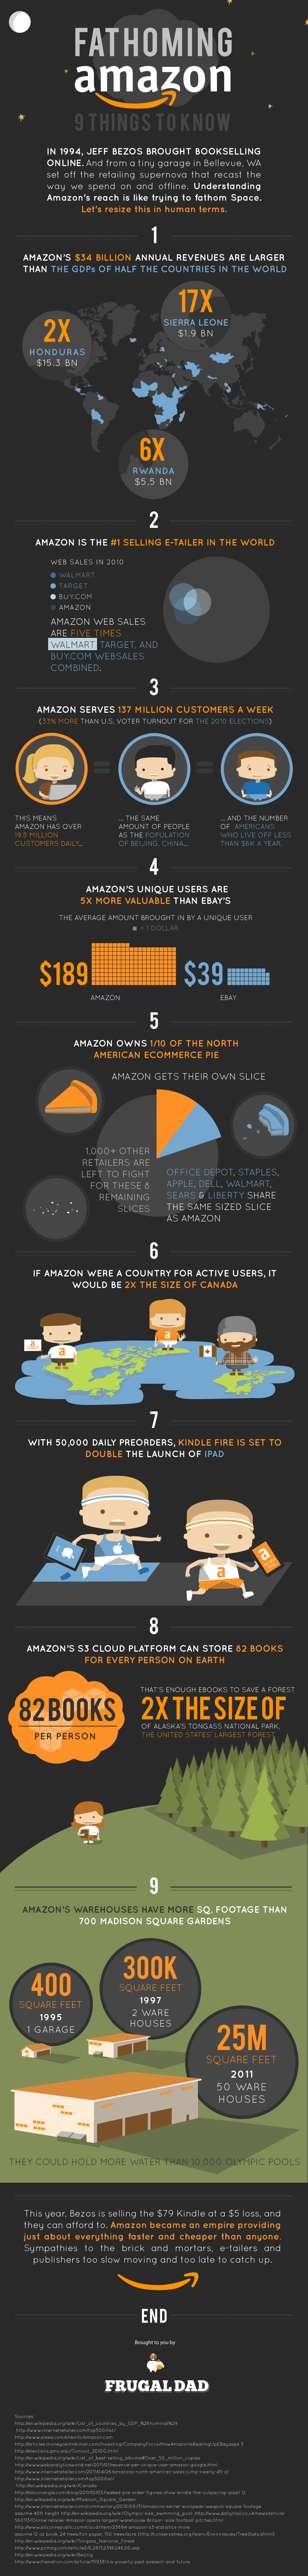 facts about amazon